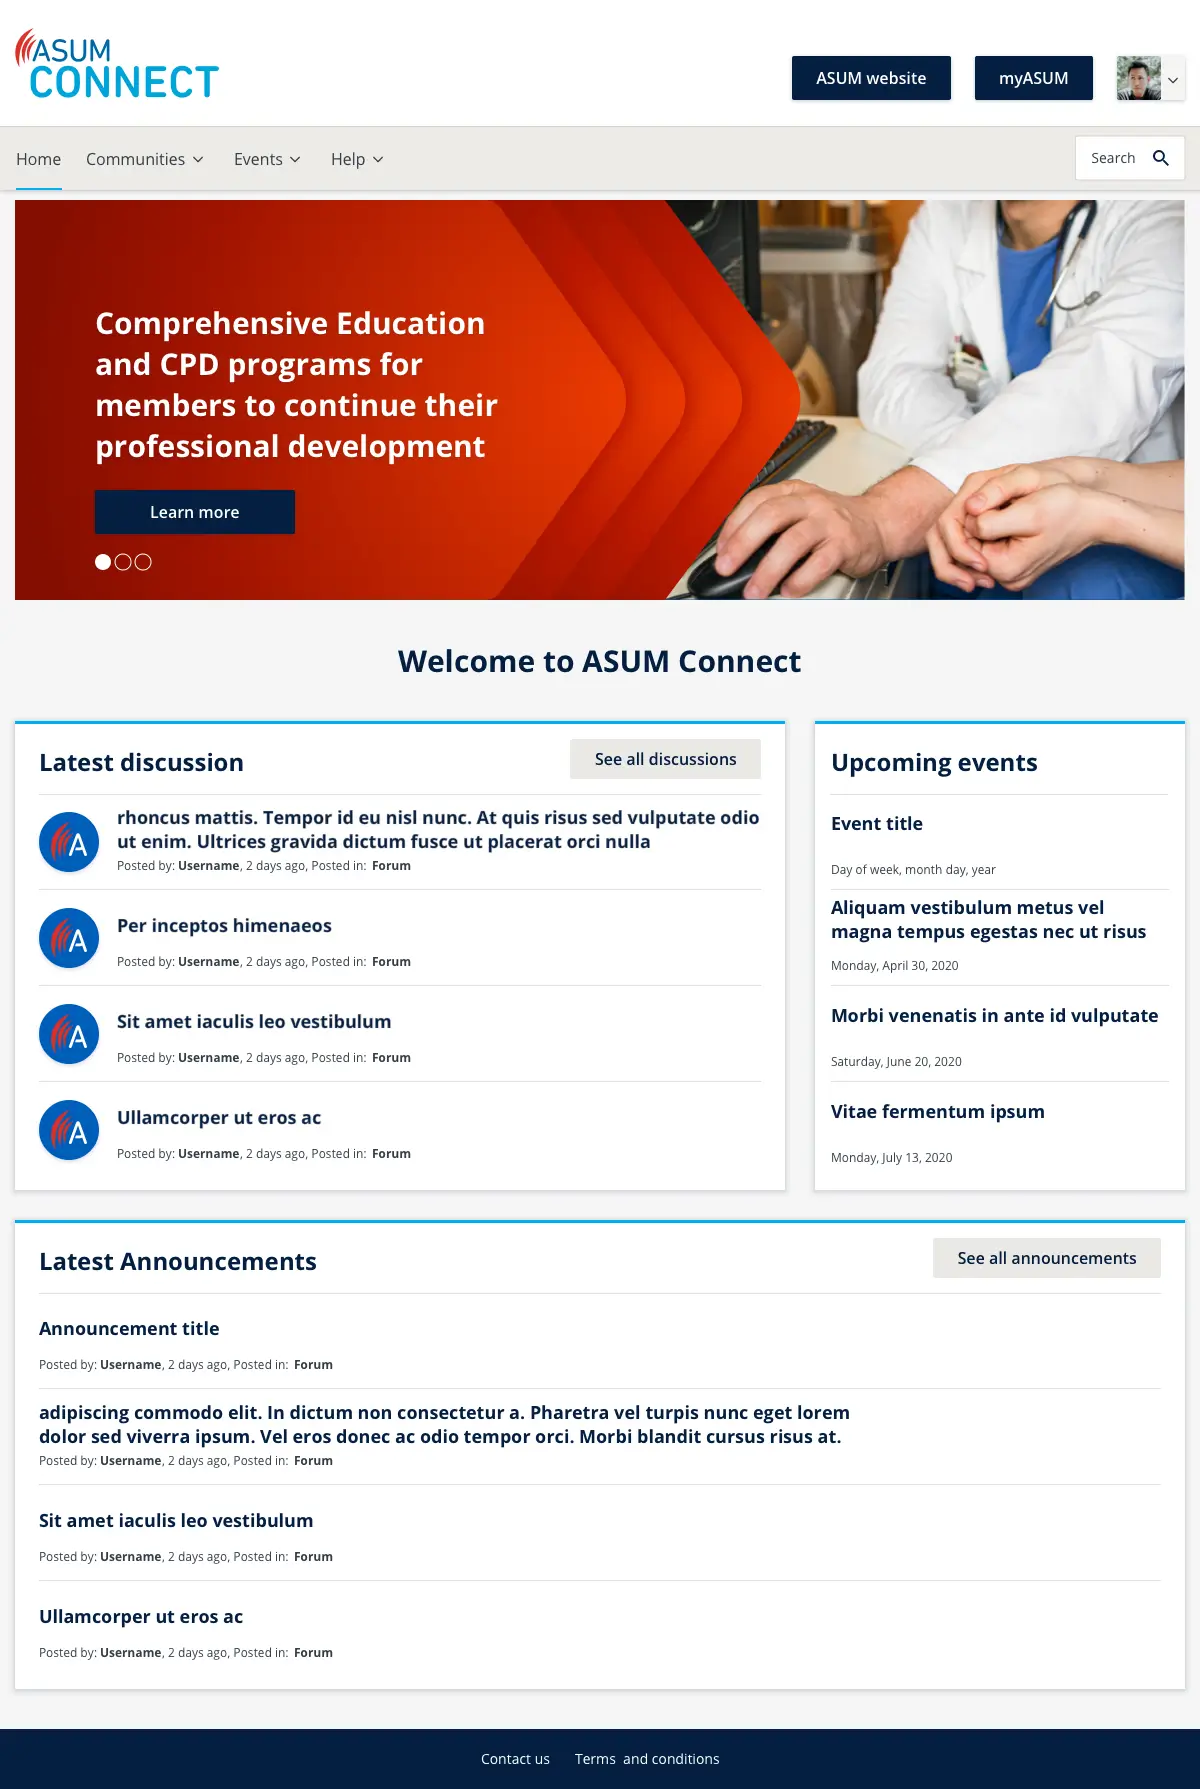 ASUM connect main landing page